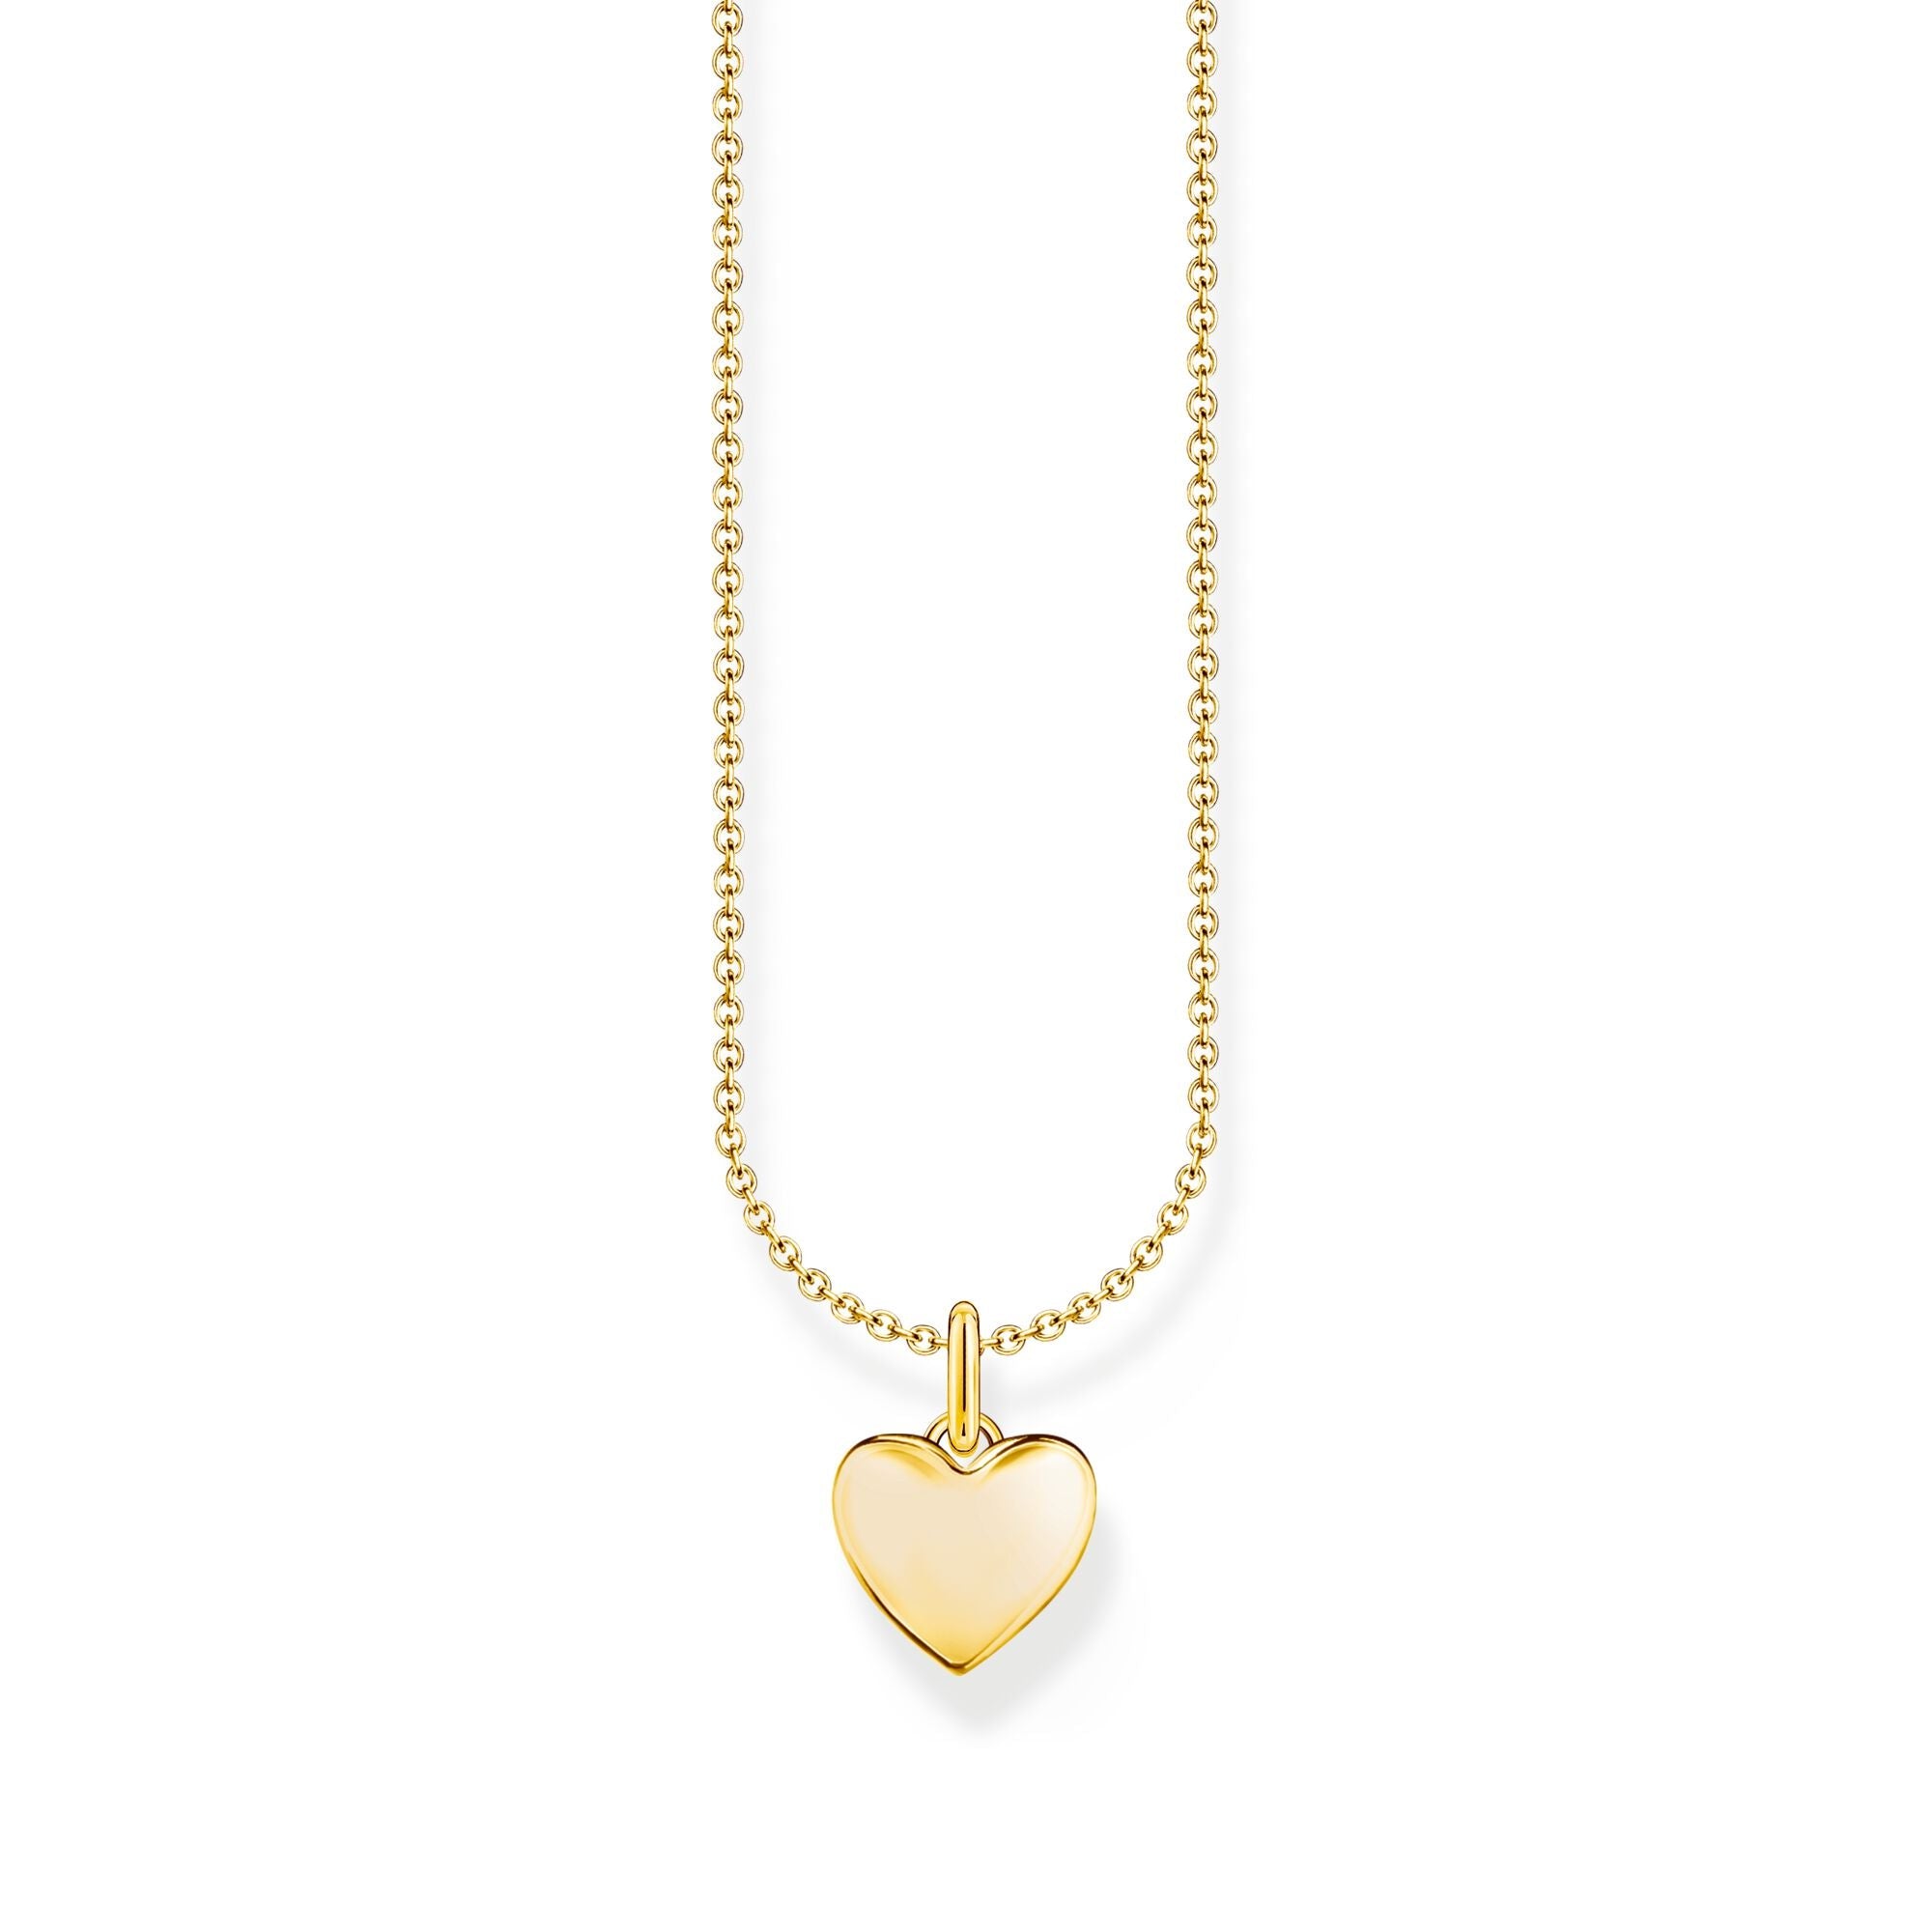 Buy Necklace with heart pendant by Thomas Sabo online - THOMAS SABO ...